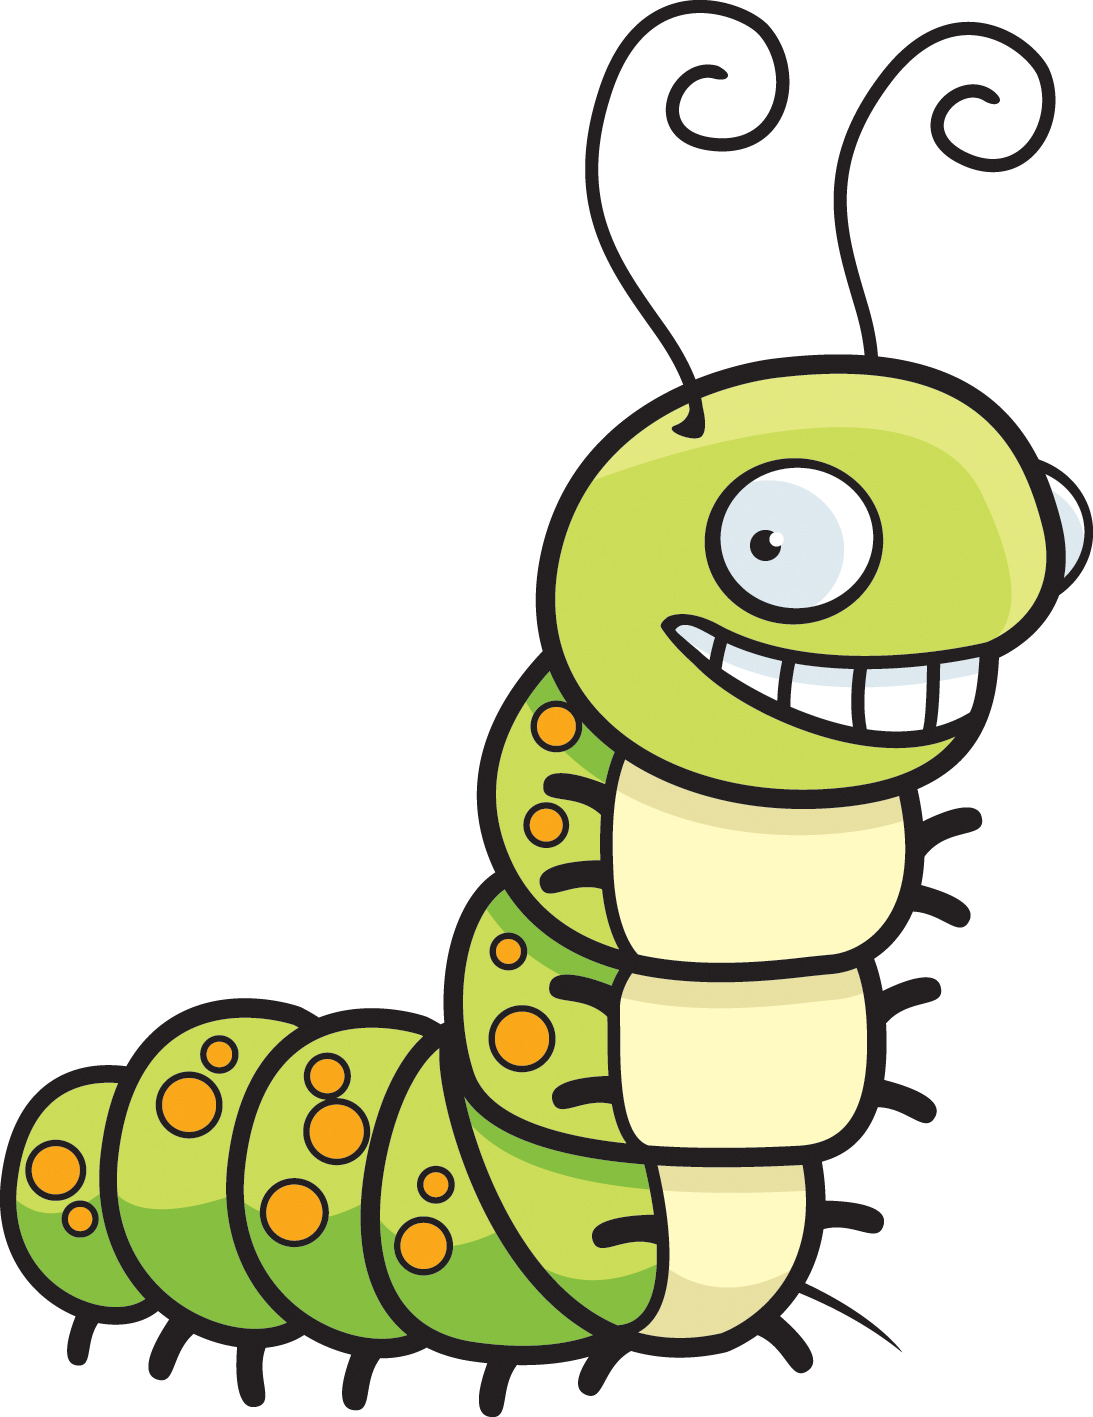 Images For > Worms In Dirt Clipart